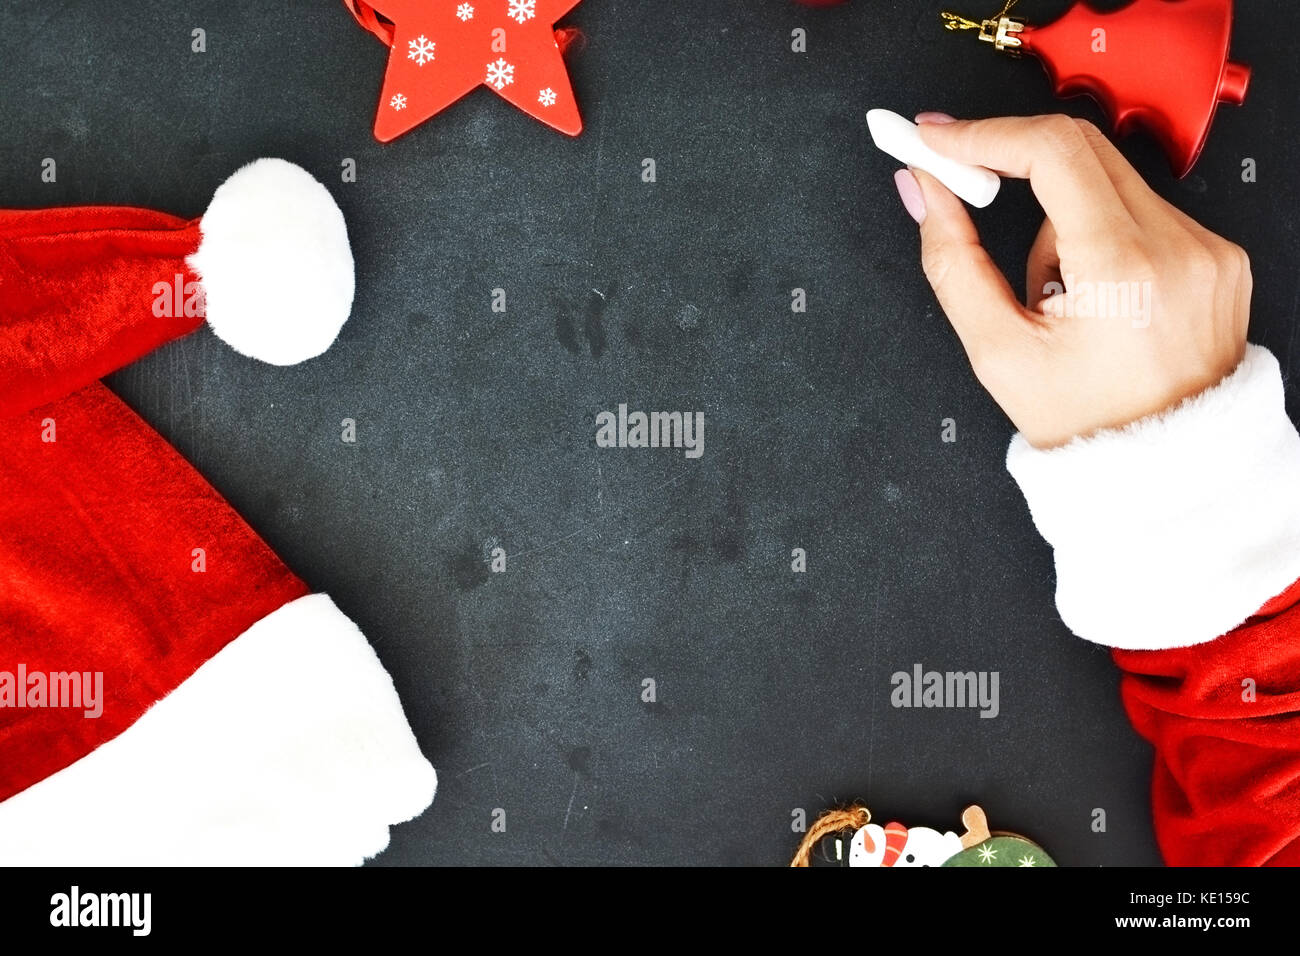 Christmas background with woman hands dressed in Santa’s costume writing on empty blackboard with seasonal decorations Stock Photo